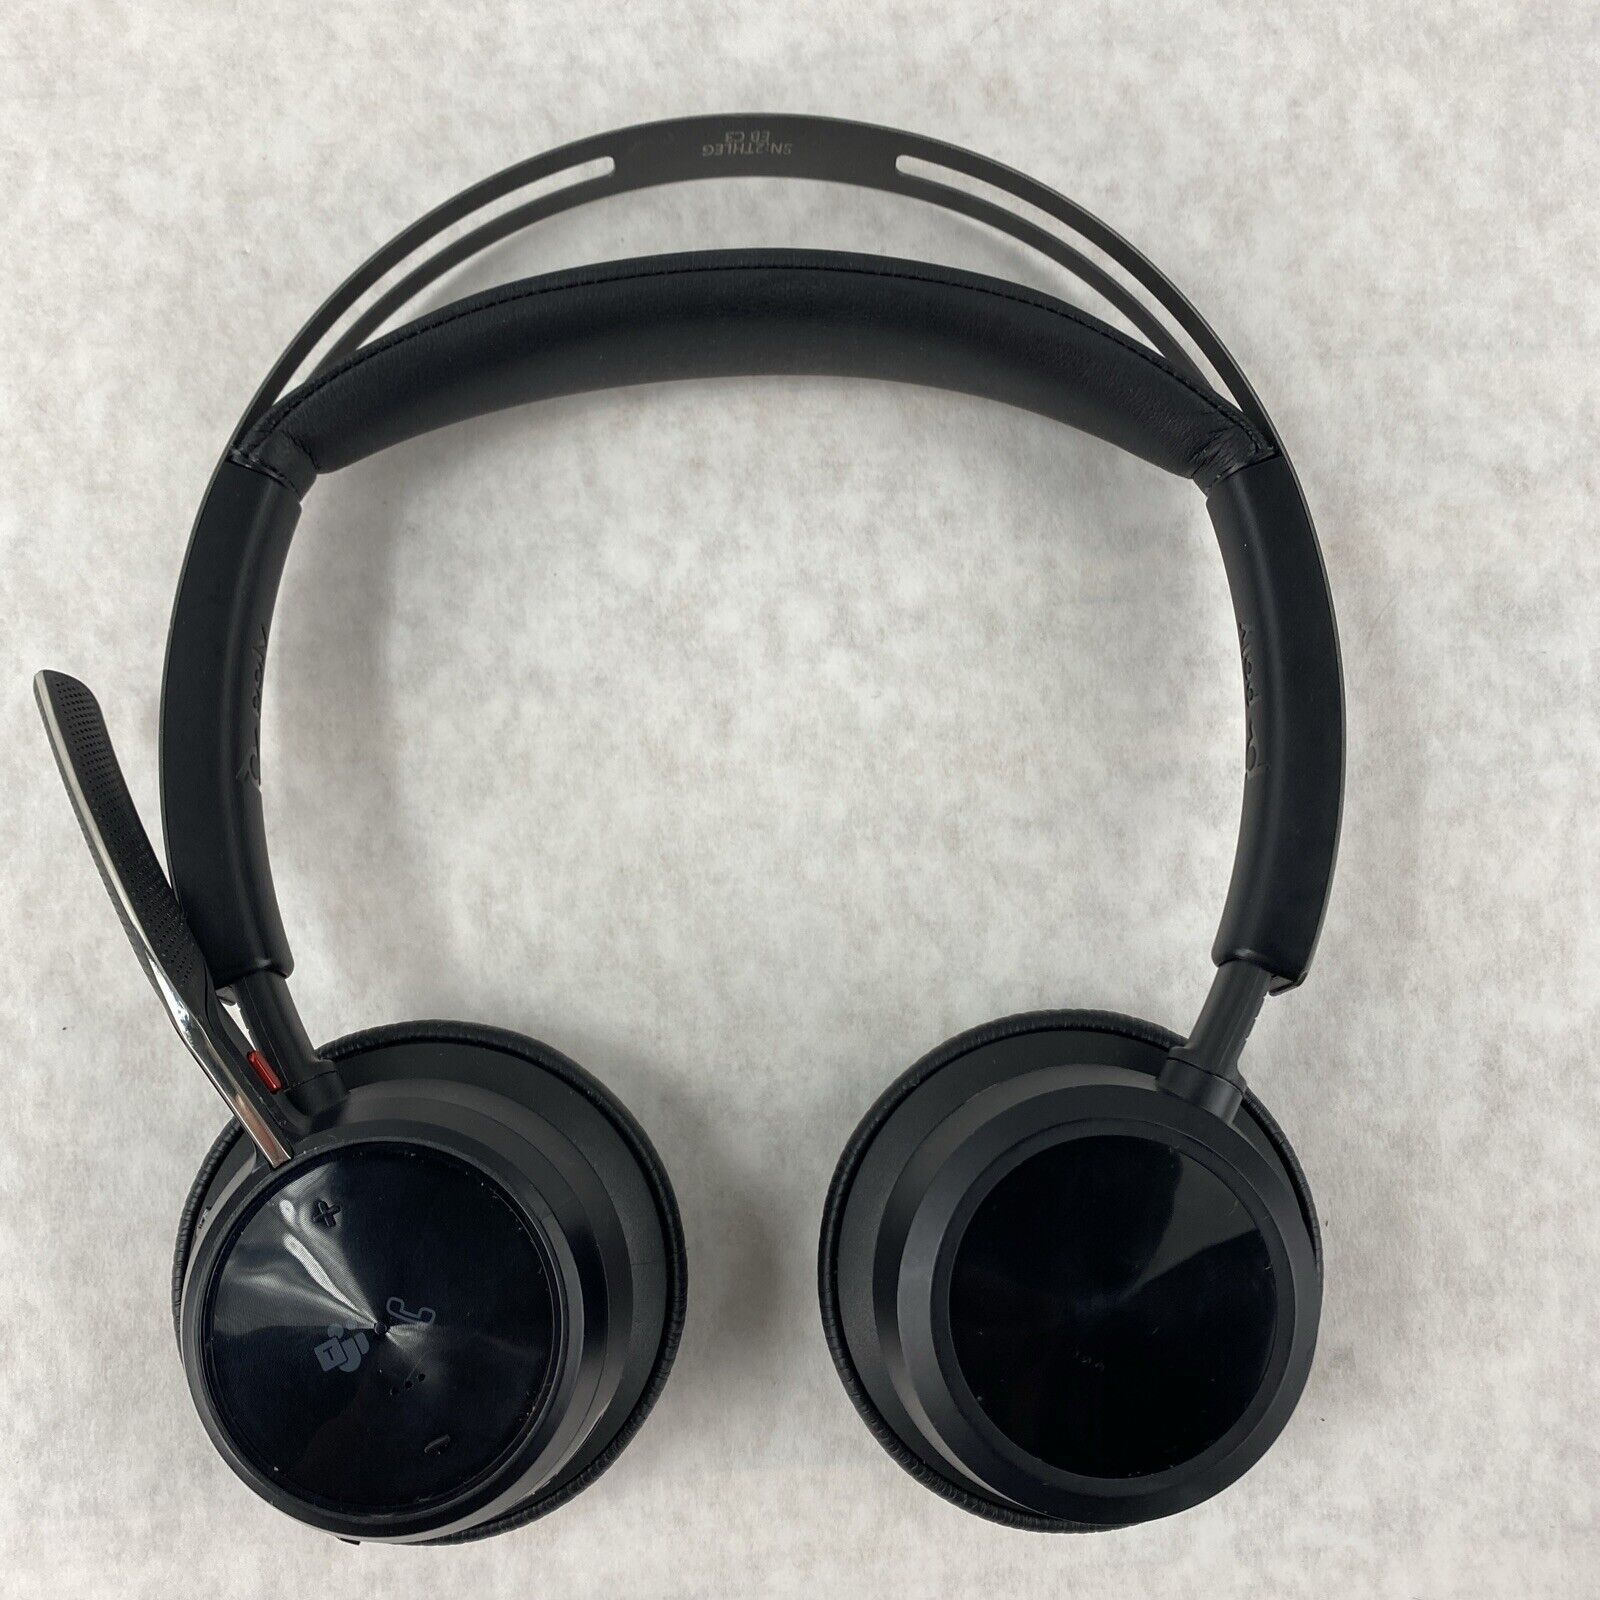 Plantronics Voyager Focus 2 Stereo Noise-Canceling Headset ONLY Tested